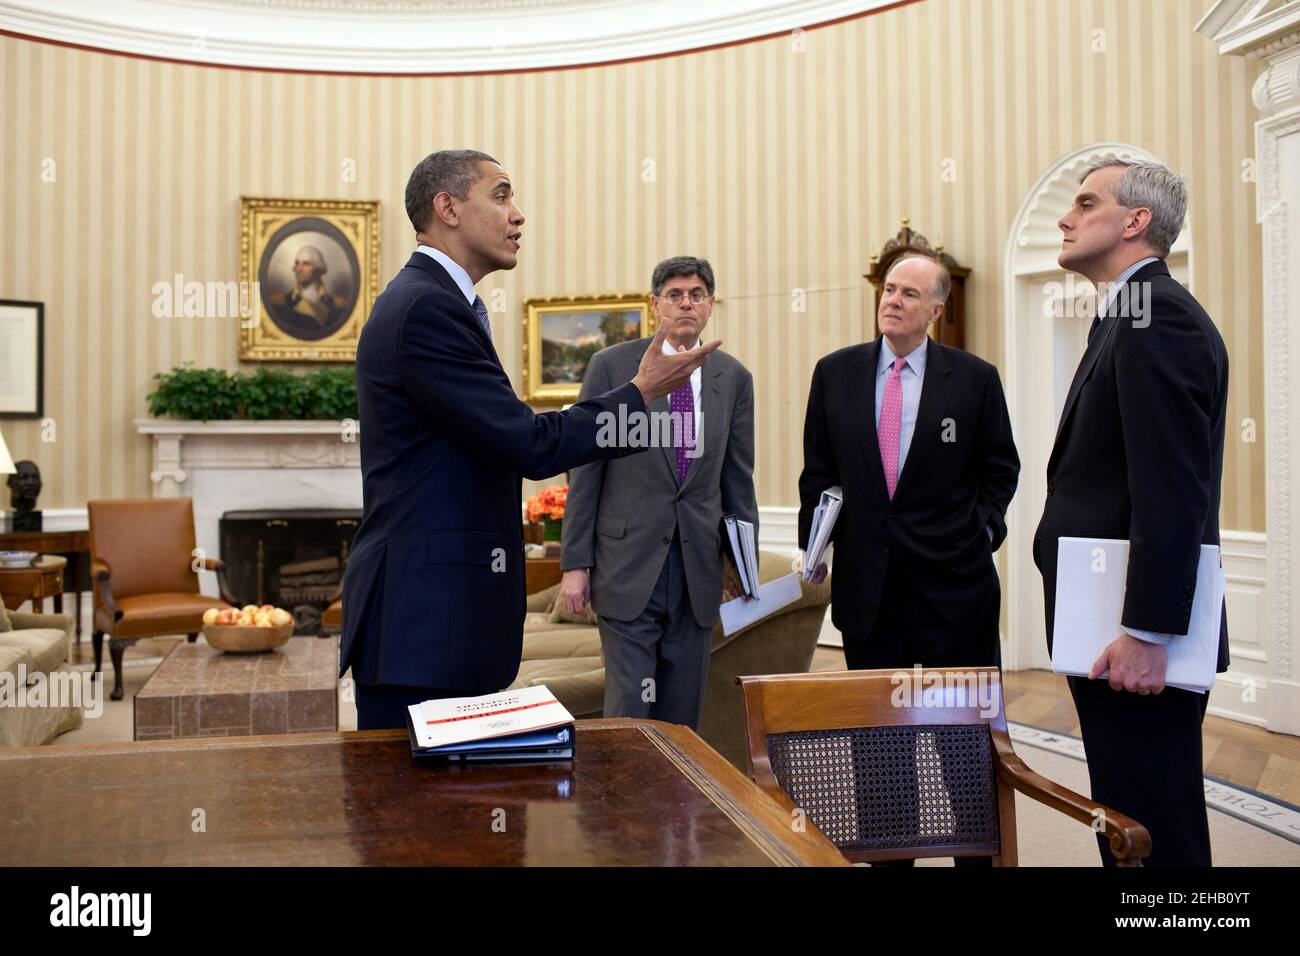 President Barack Obama talks with Chief of Staff Jack Lew, National Security Advisor Tom Donilon, and Deputy National Security Advisor Denis McDonough in the Oval Office, March 16, 2012. Stock Photo